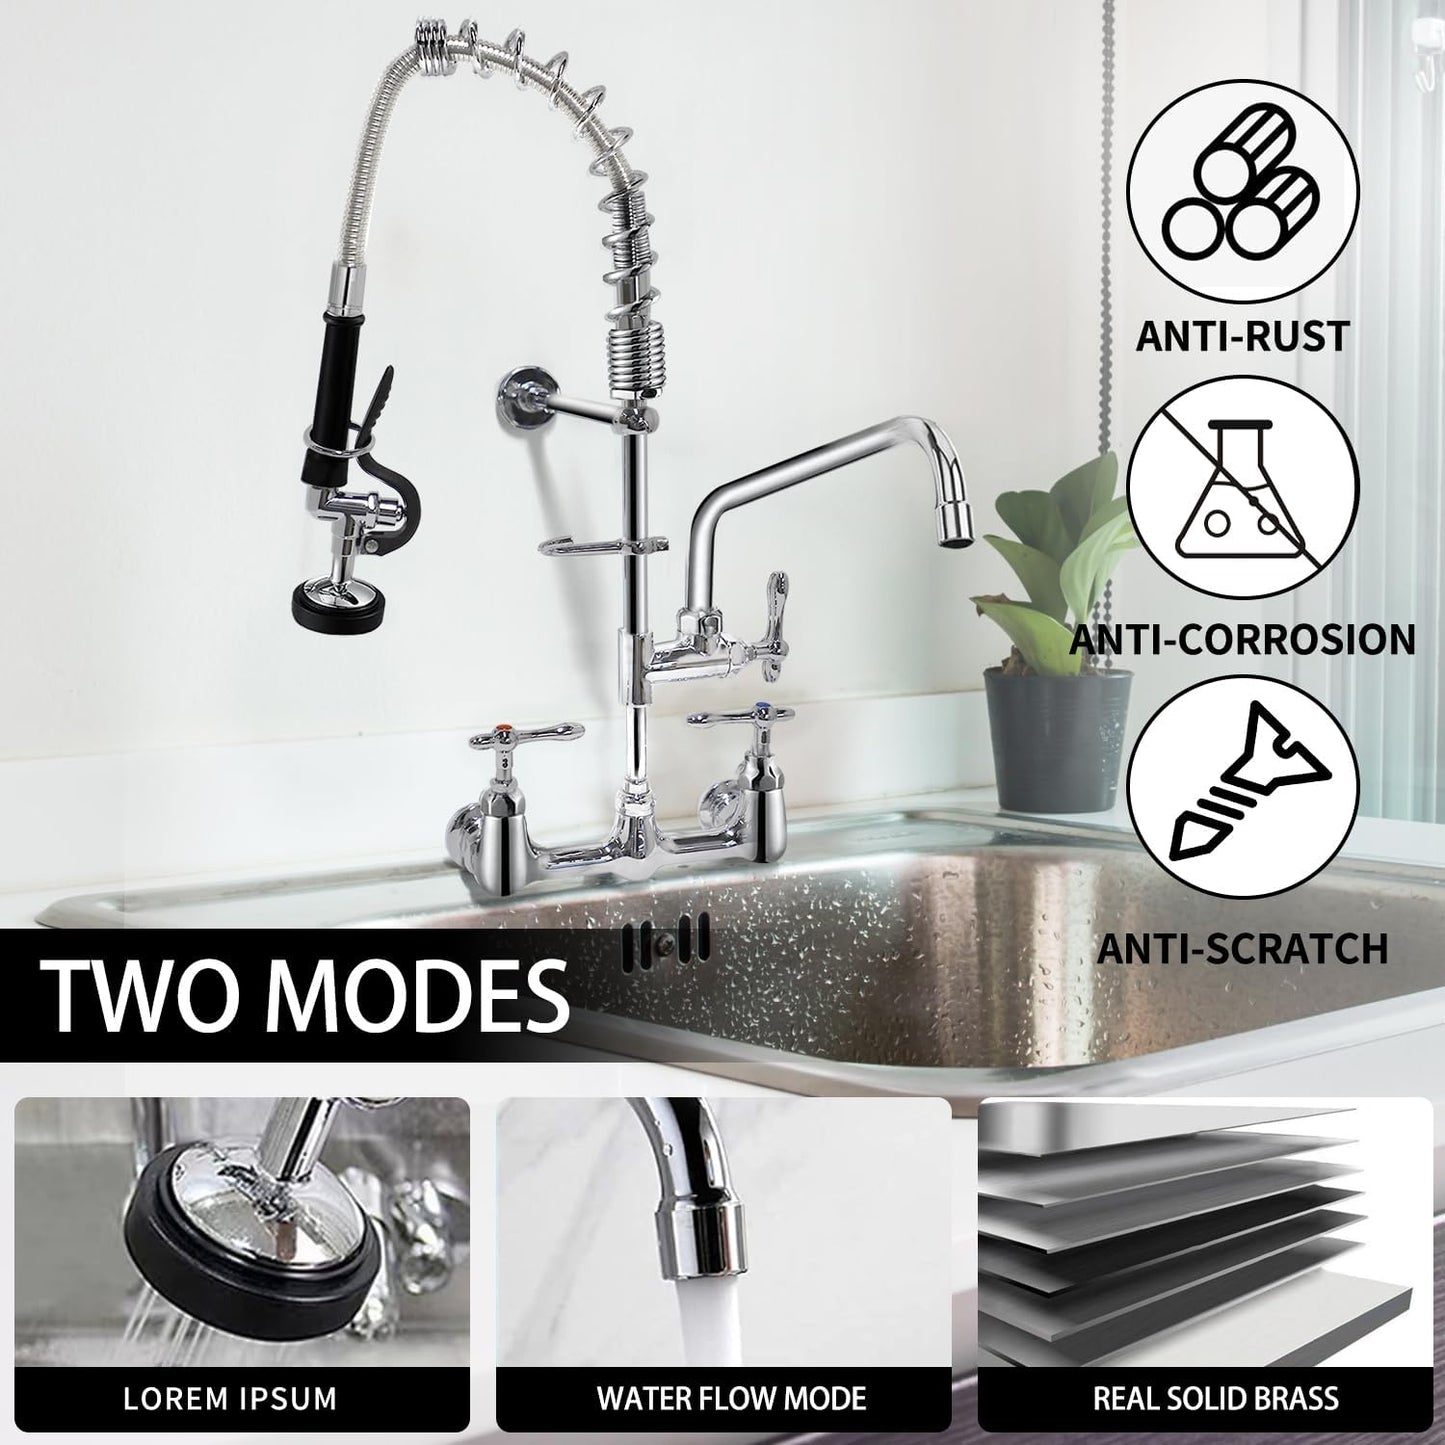 QANBAIN Commercial Sink Faucet,Commercial Faucet with Sprayer 8 Adjustable Center Wall Mounted Restaurant Faucets,12" Spout andPull-Down Pre-Rinse Faucet 25 Height Suitable for 1, 2 or 3 Sinks (